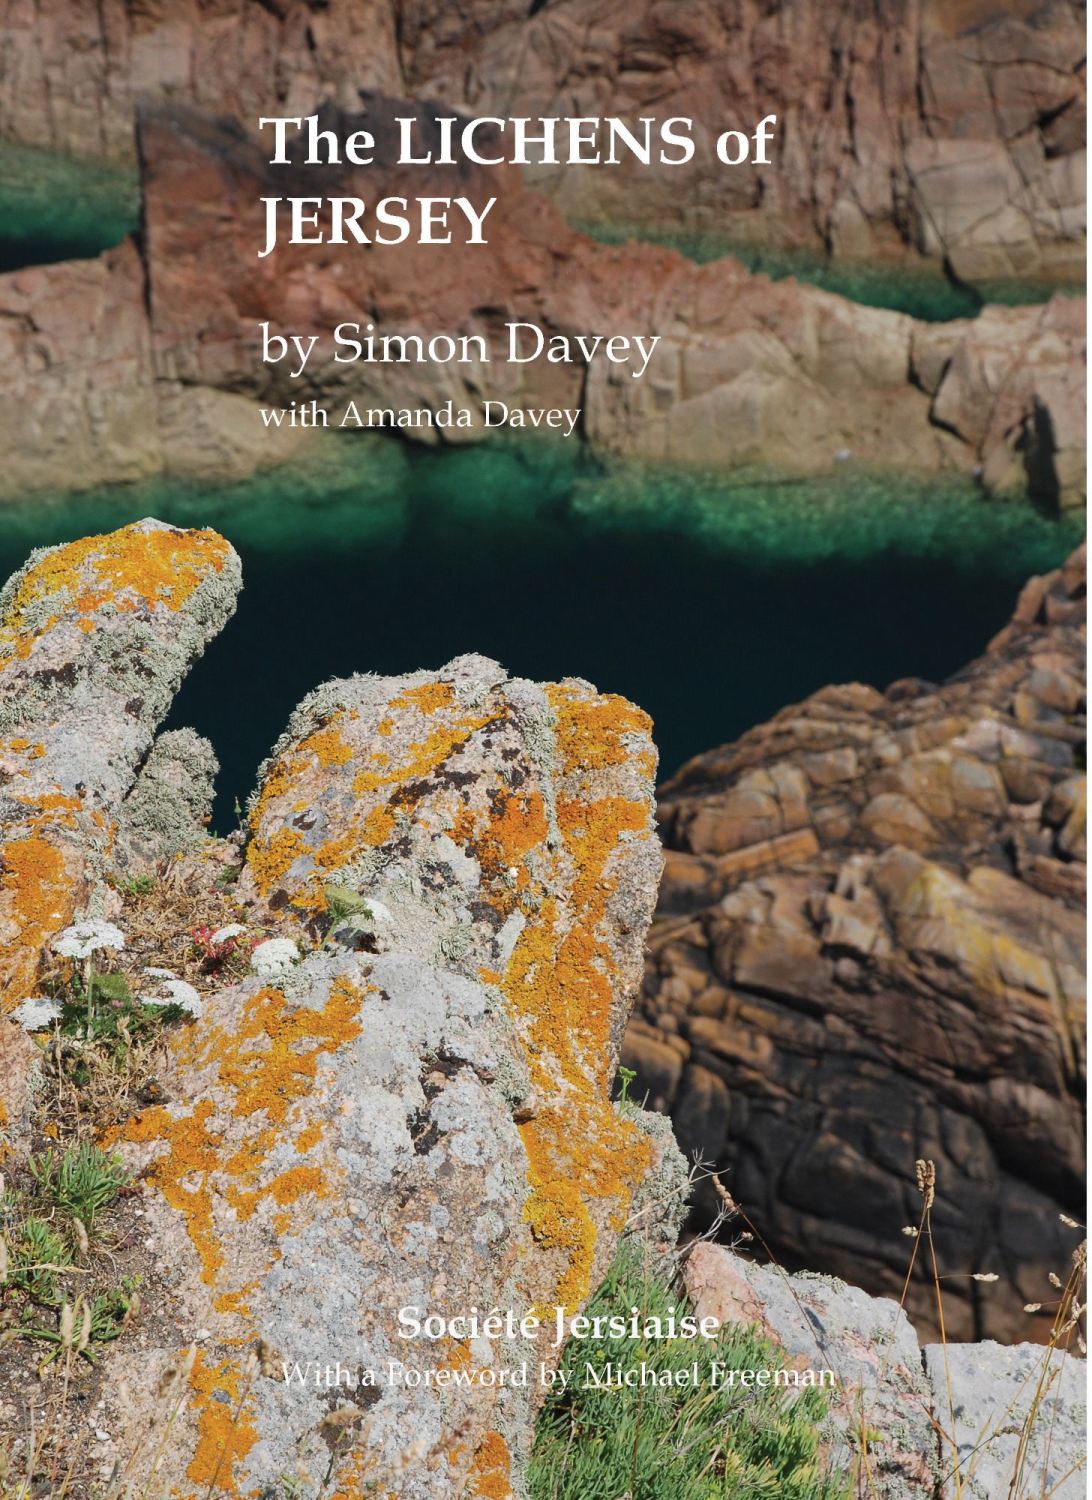 The Lichens of Jersey